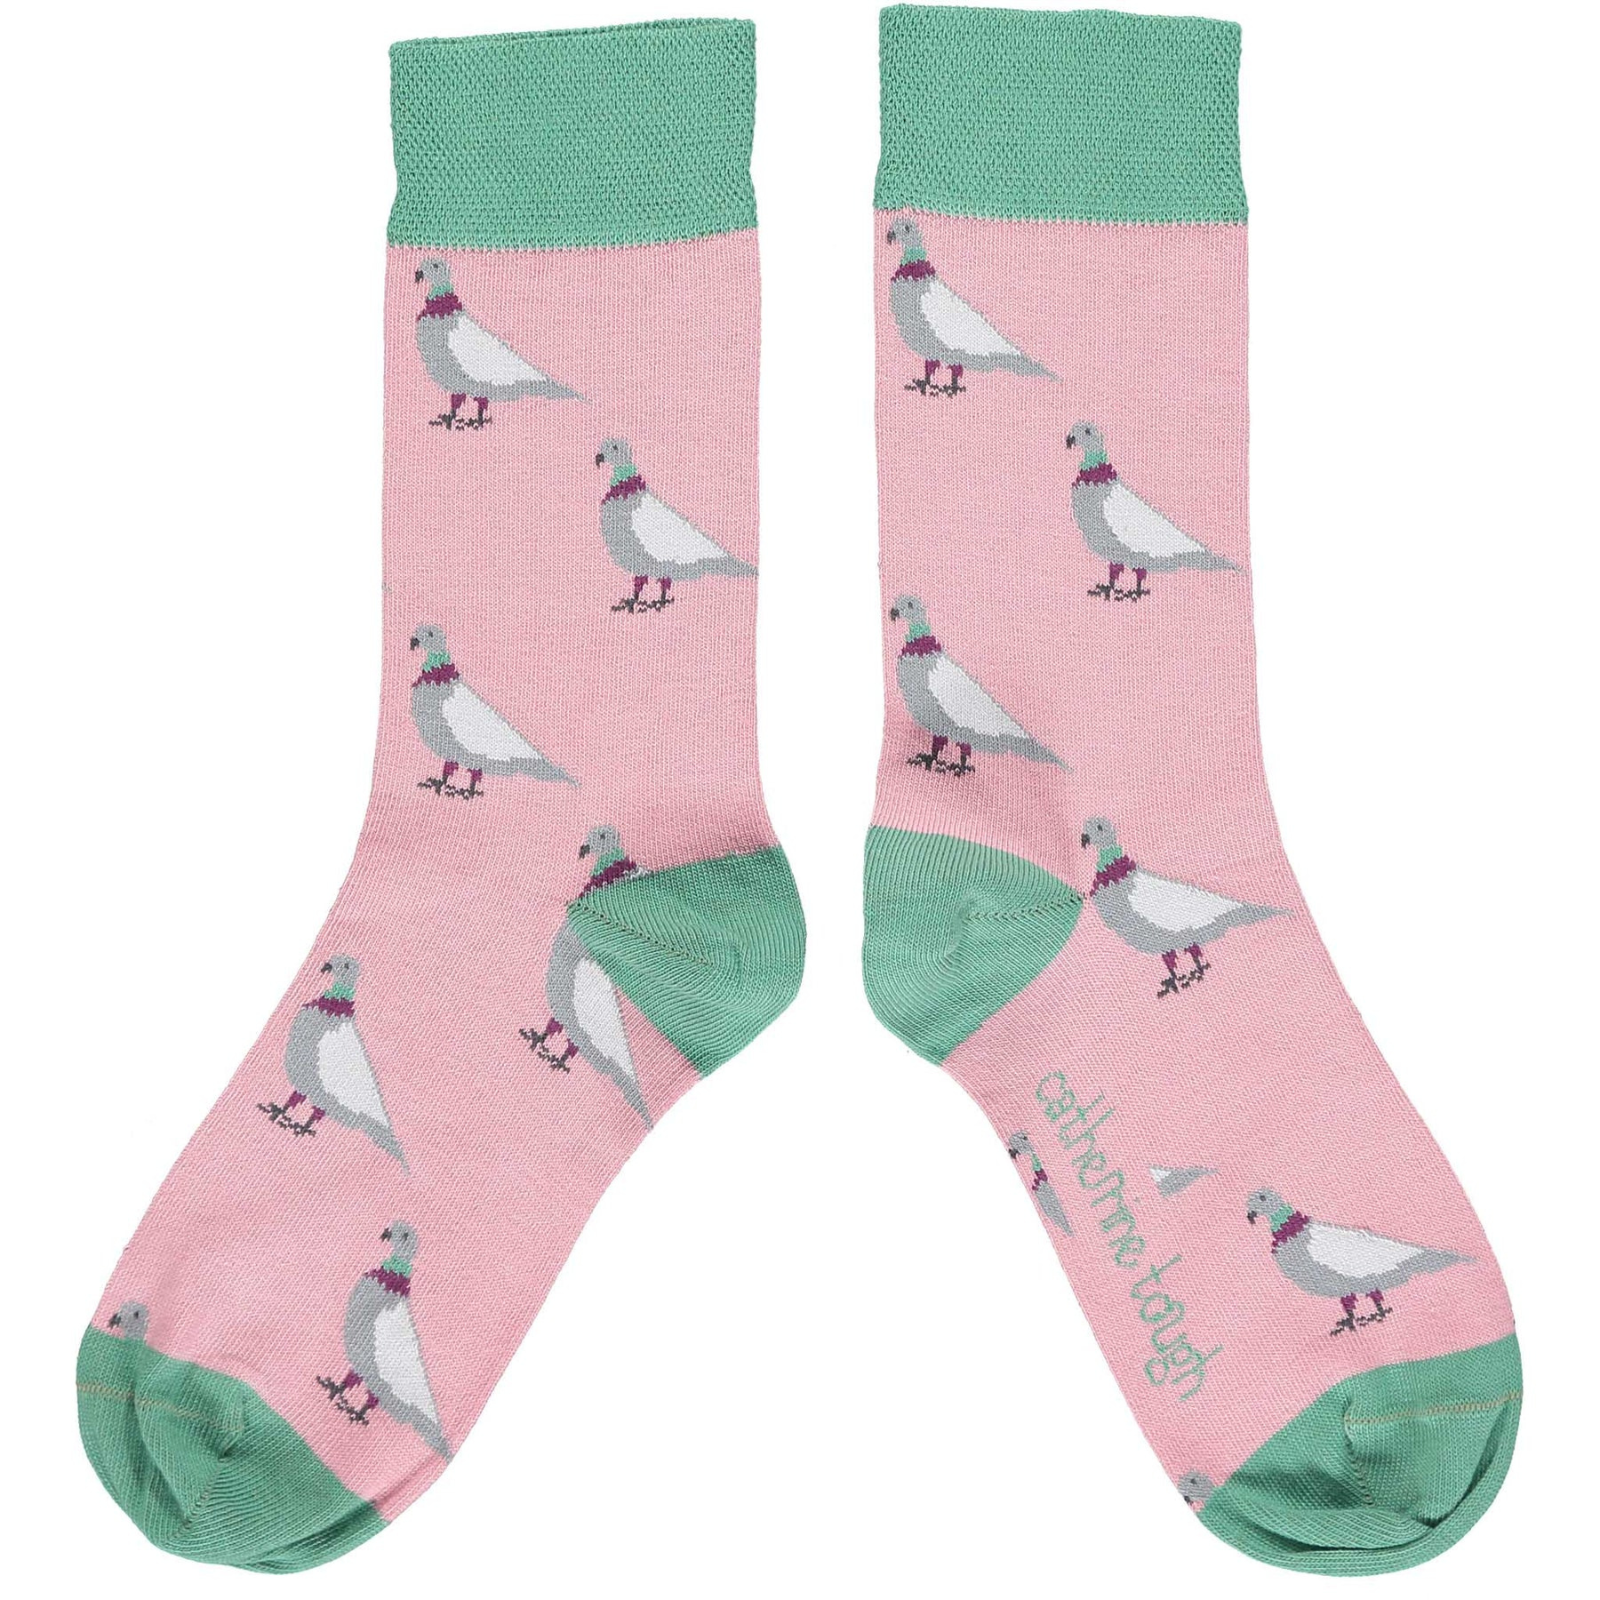 Catherine Tough women's pigeon socks design features gray pigeons on a pink base framed with soft green cuffs, heels & toes